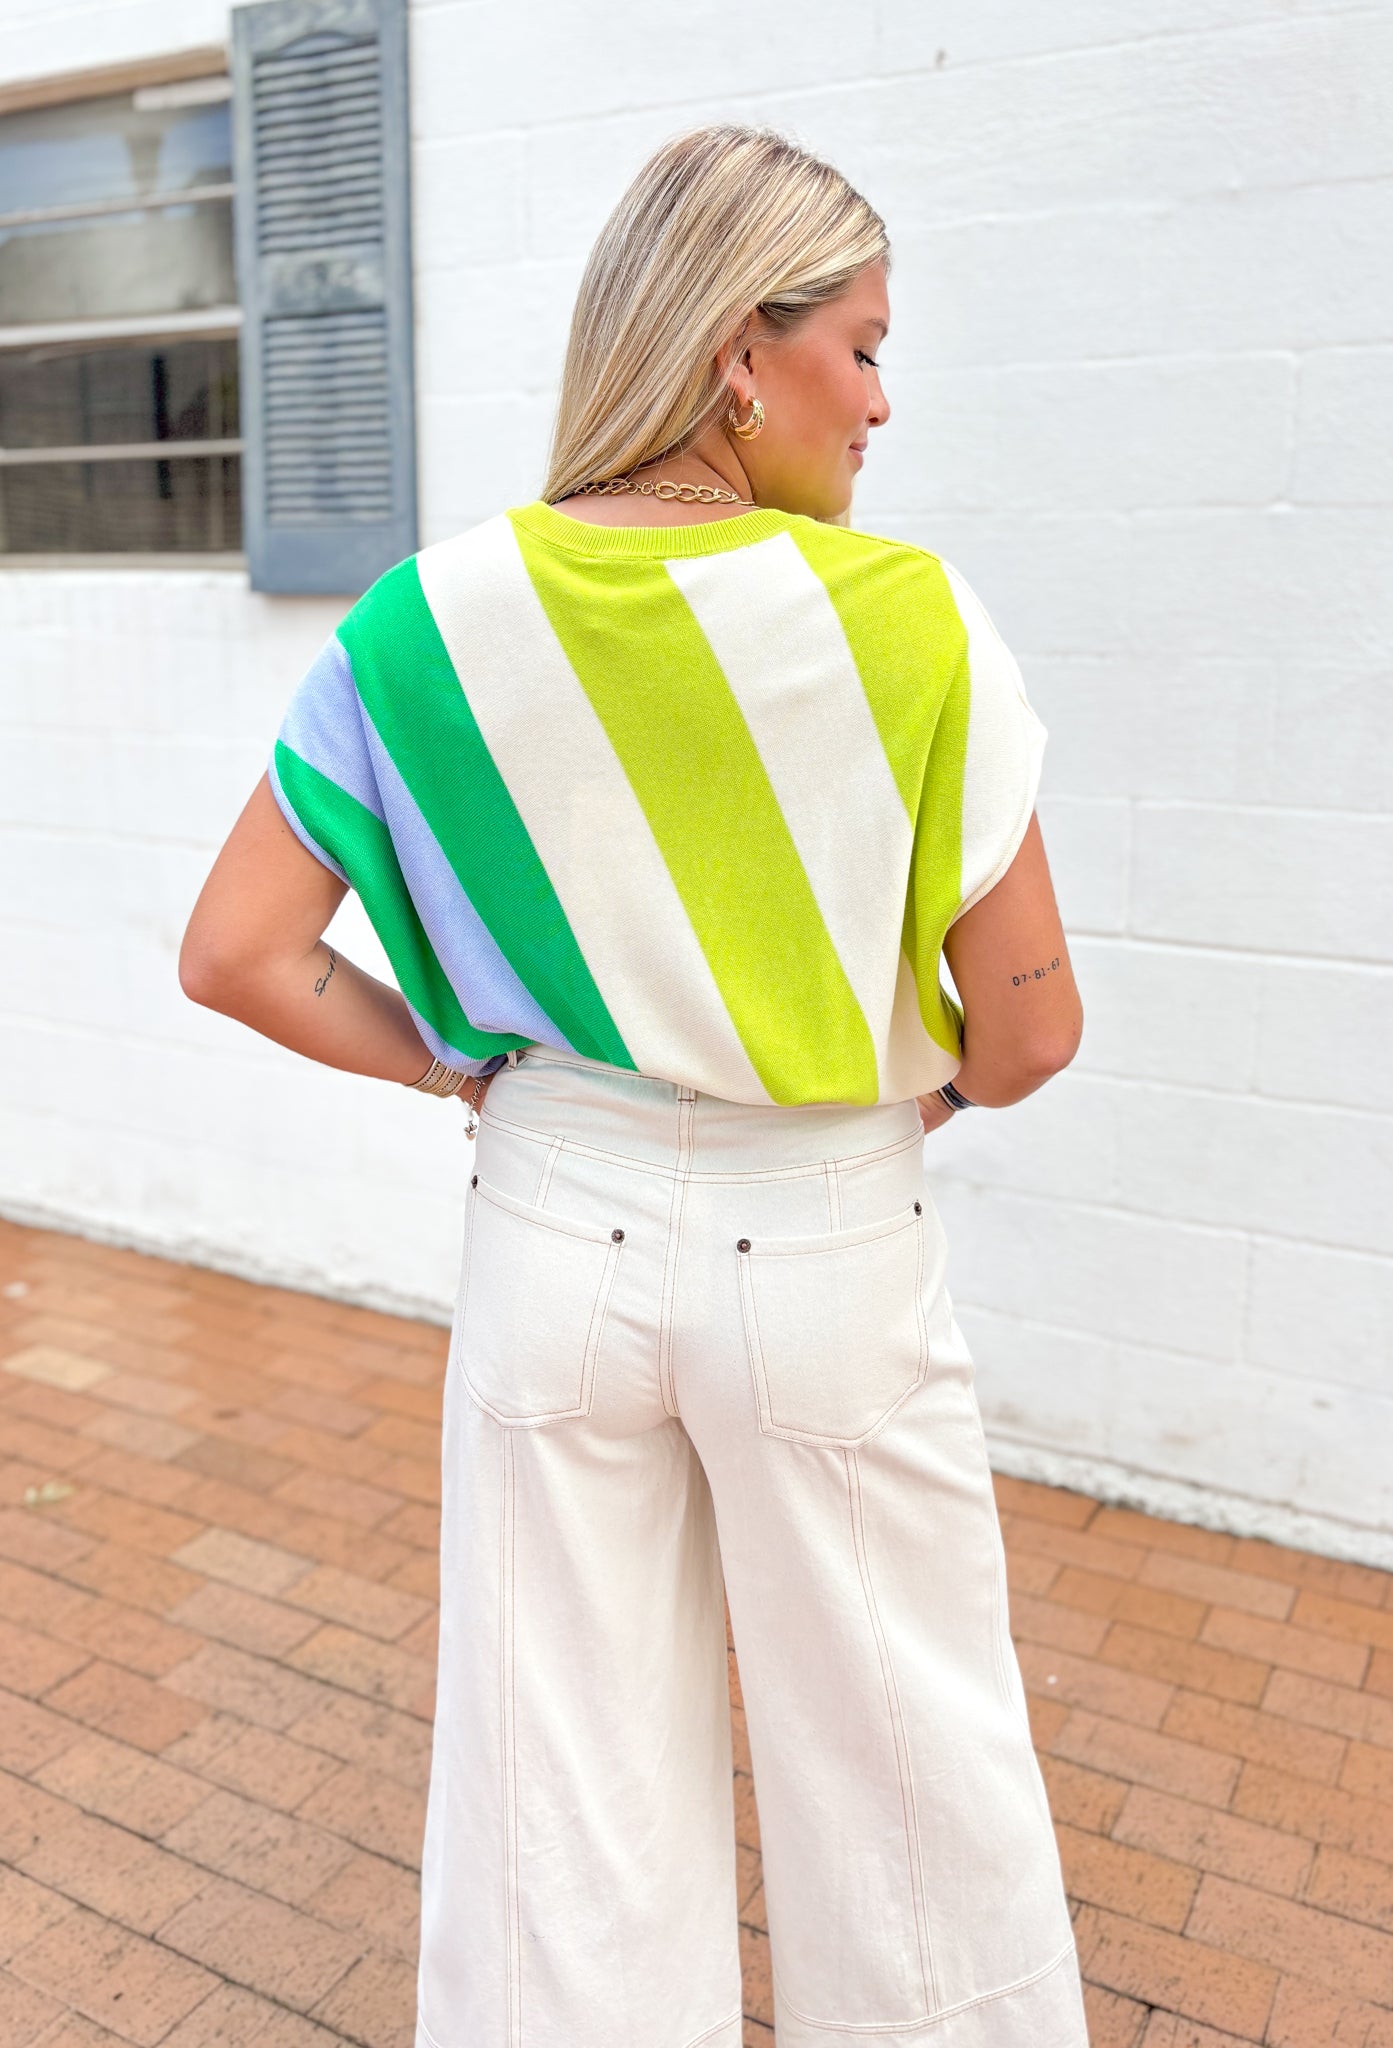 Never Told You Top, short sleeve sweater top with diagonal stripes in the color cream, lime green, kelly green, and light blue 